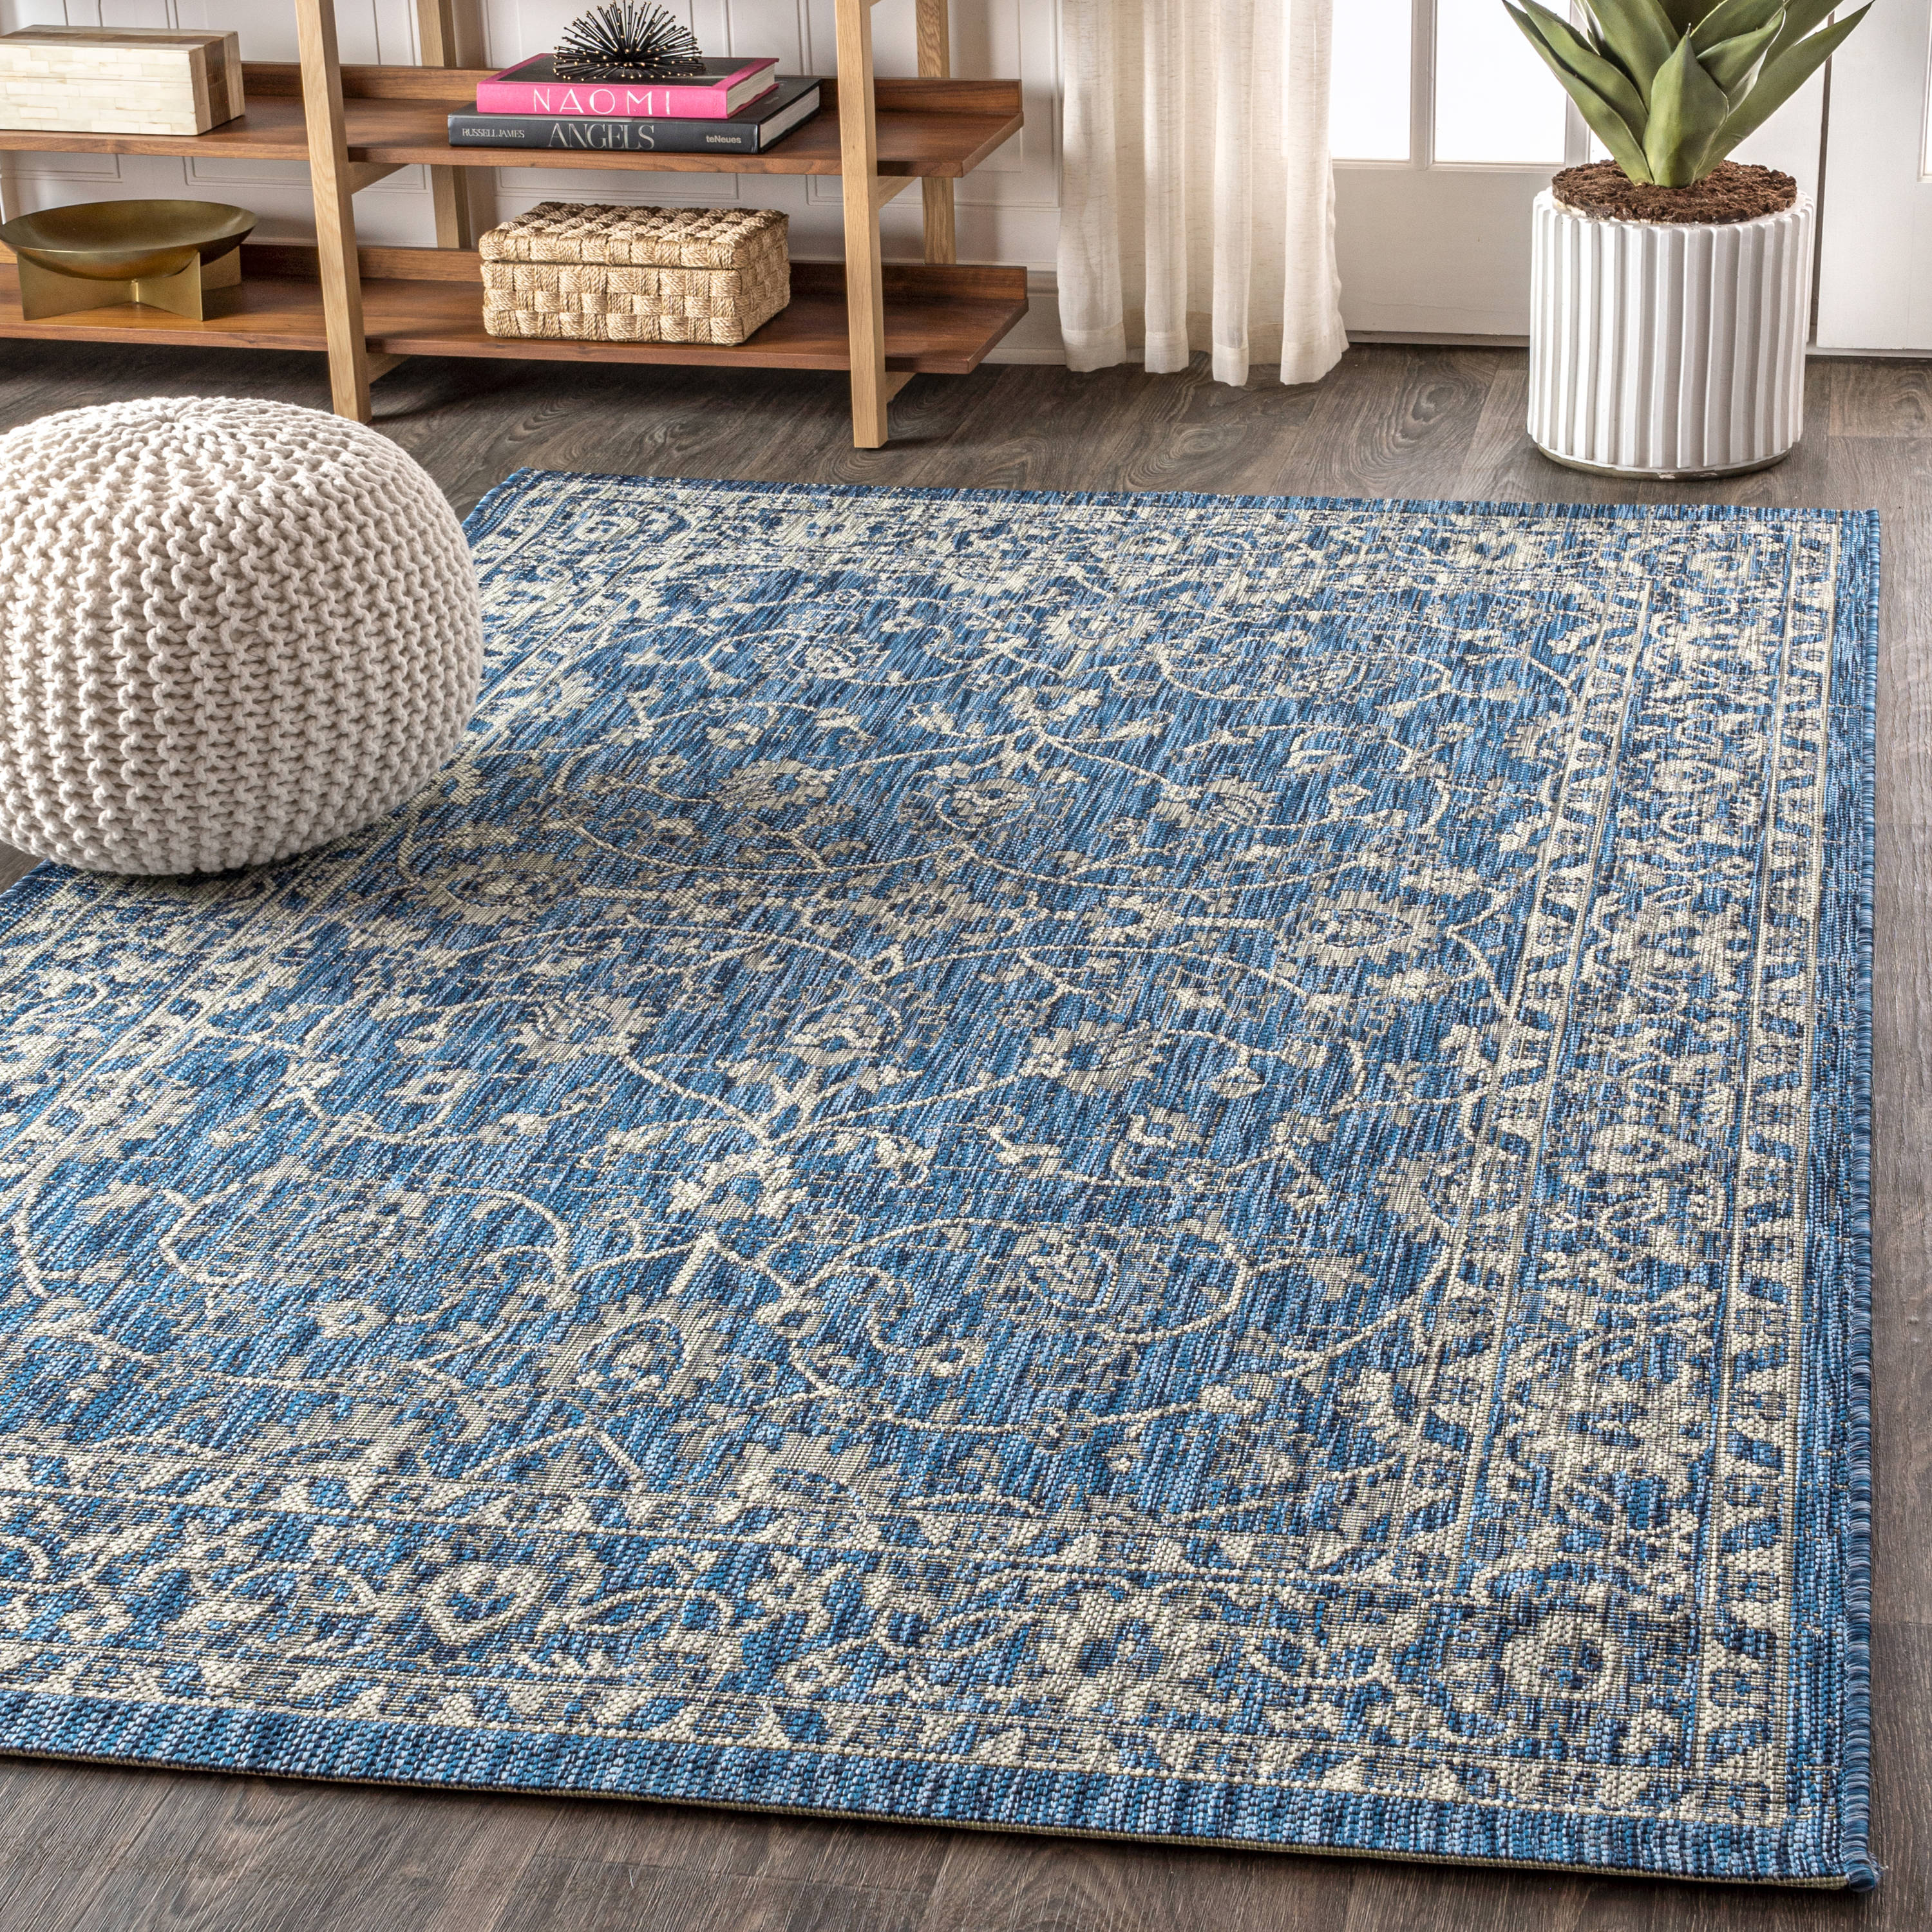 Felton Blue and Gray 8 Foot Round Rug